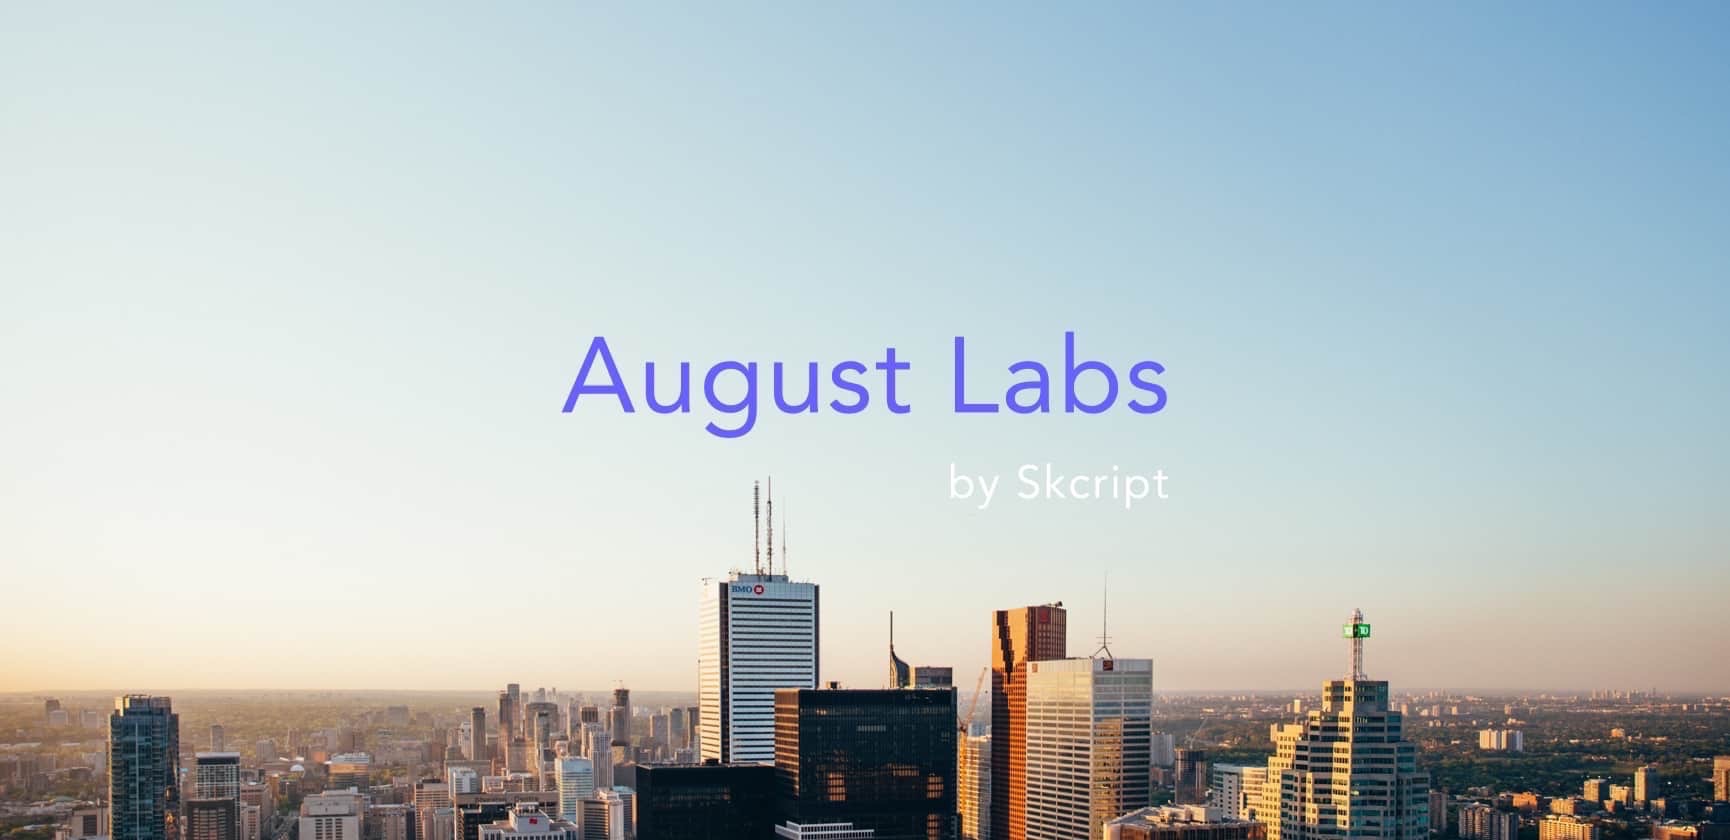 August Labs to help enterprises work at the speed of startups 🎉